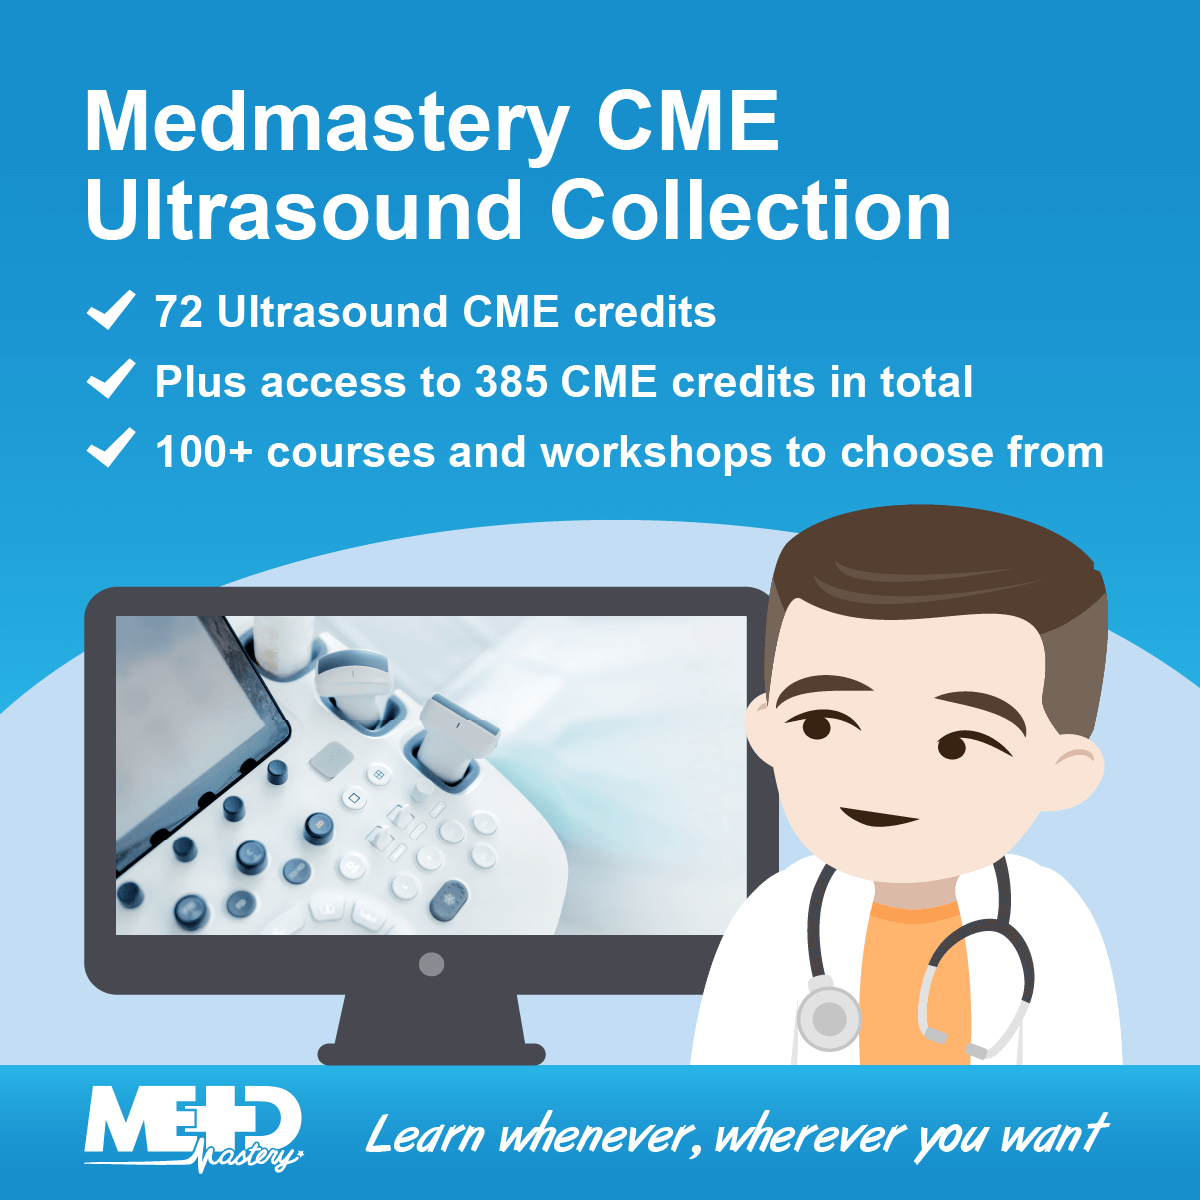 Medmastery CME Ultrasound Collection